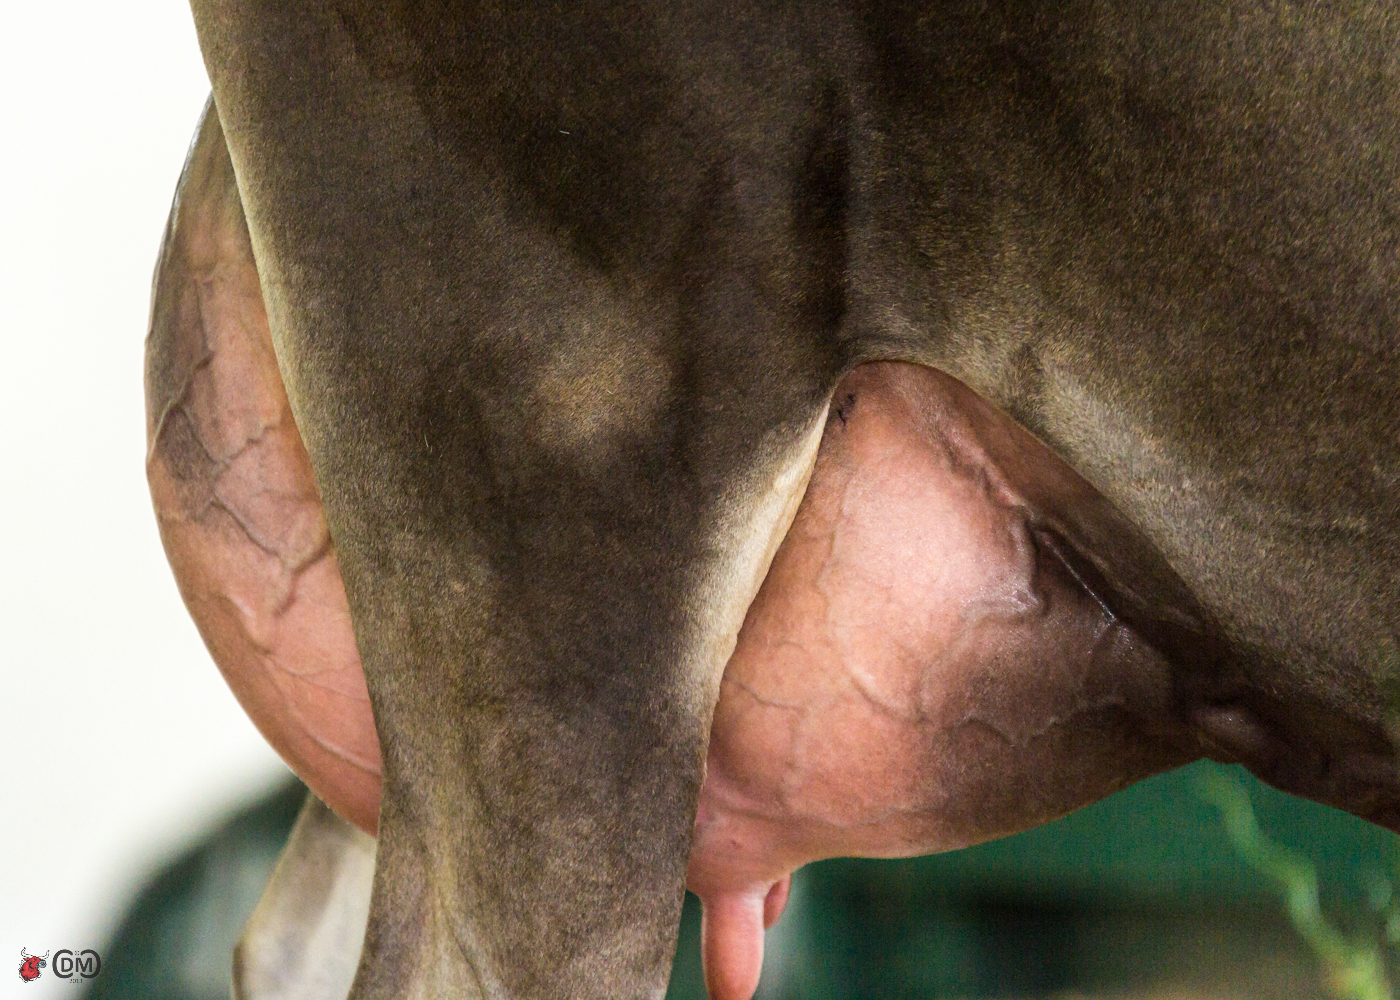 Just fresh - Milo V R Summer VG-89 Max score - All-Canadian Milking Yearling 2012 sold for 32,000 to Budjon - Vail